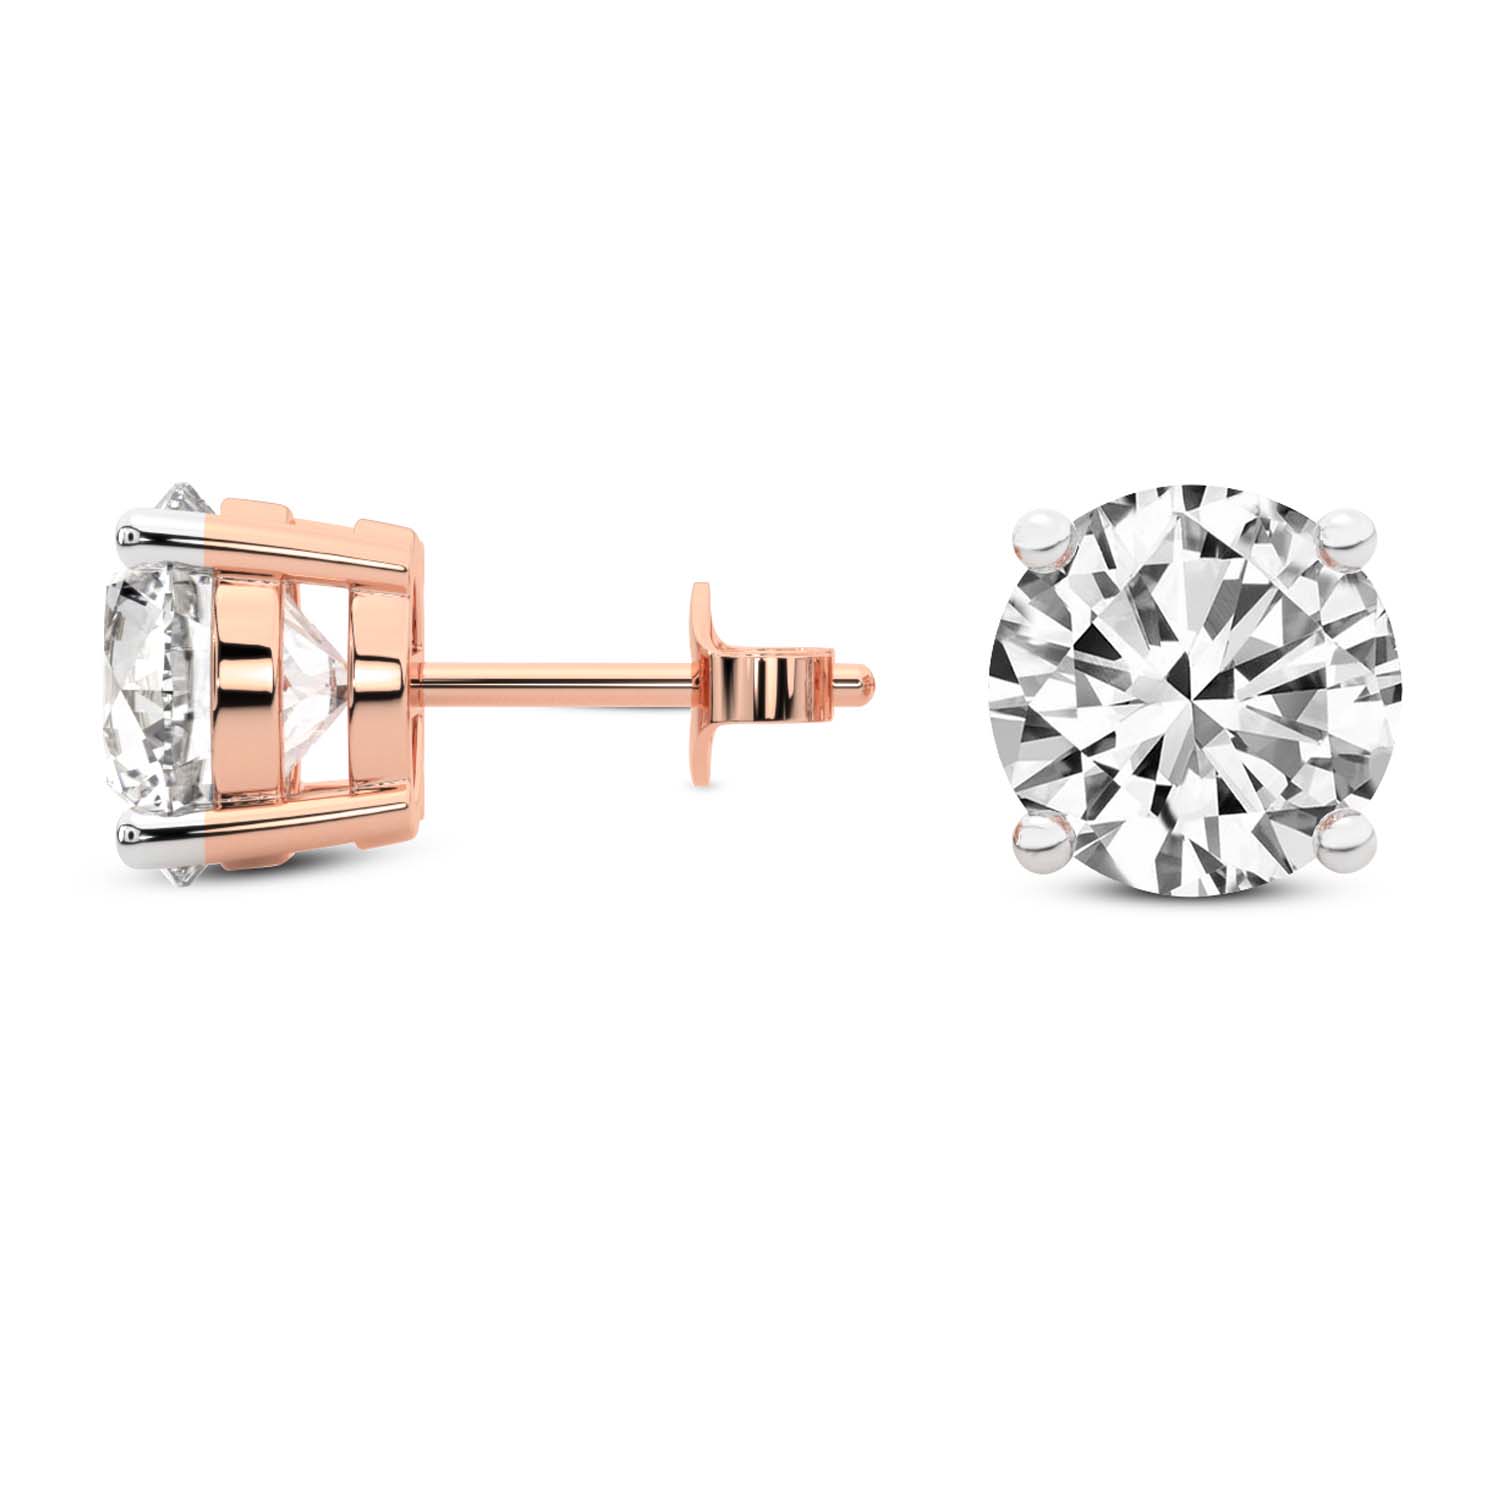 4 Prong Round Lab Diamond Stud Earrings rose gold earring, small left view